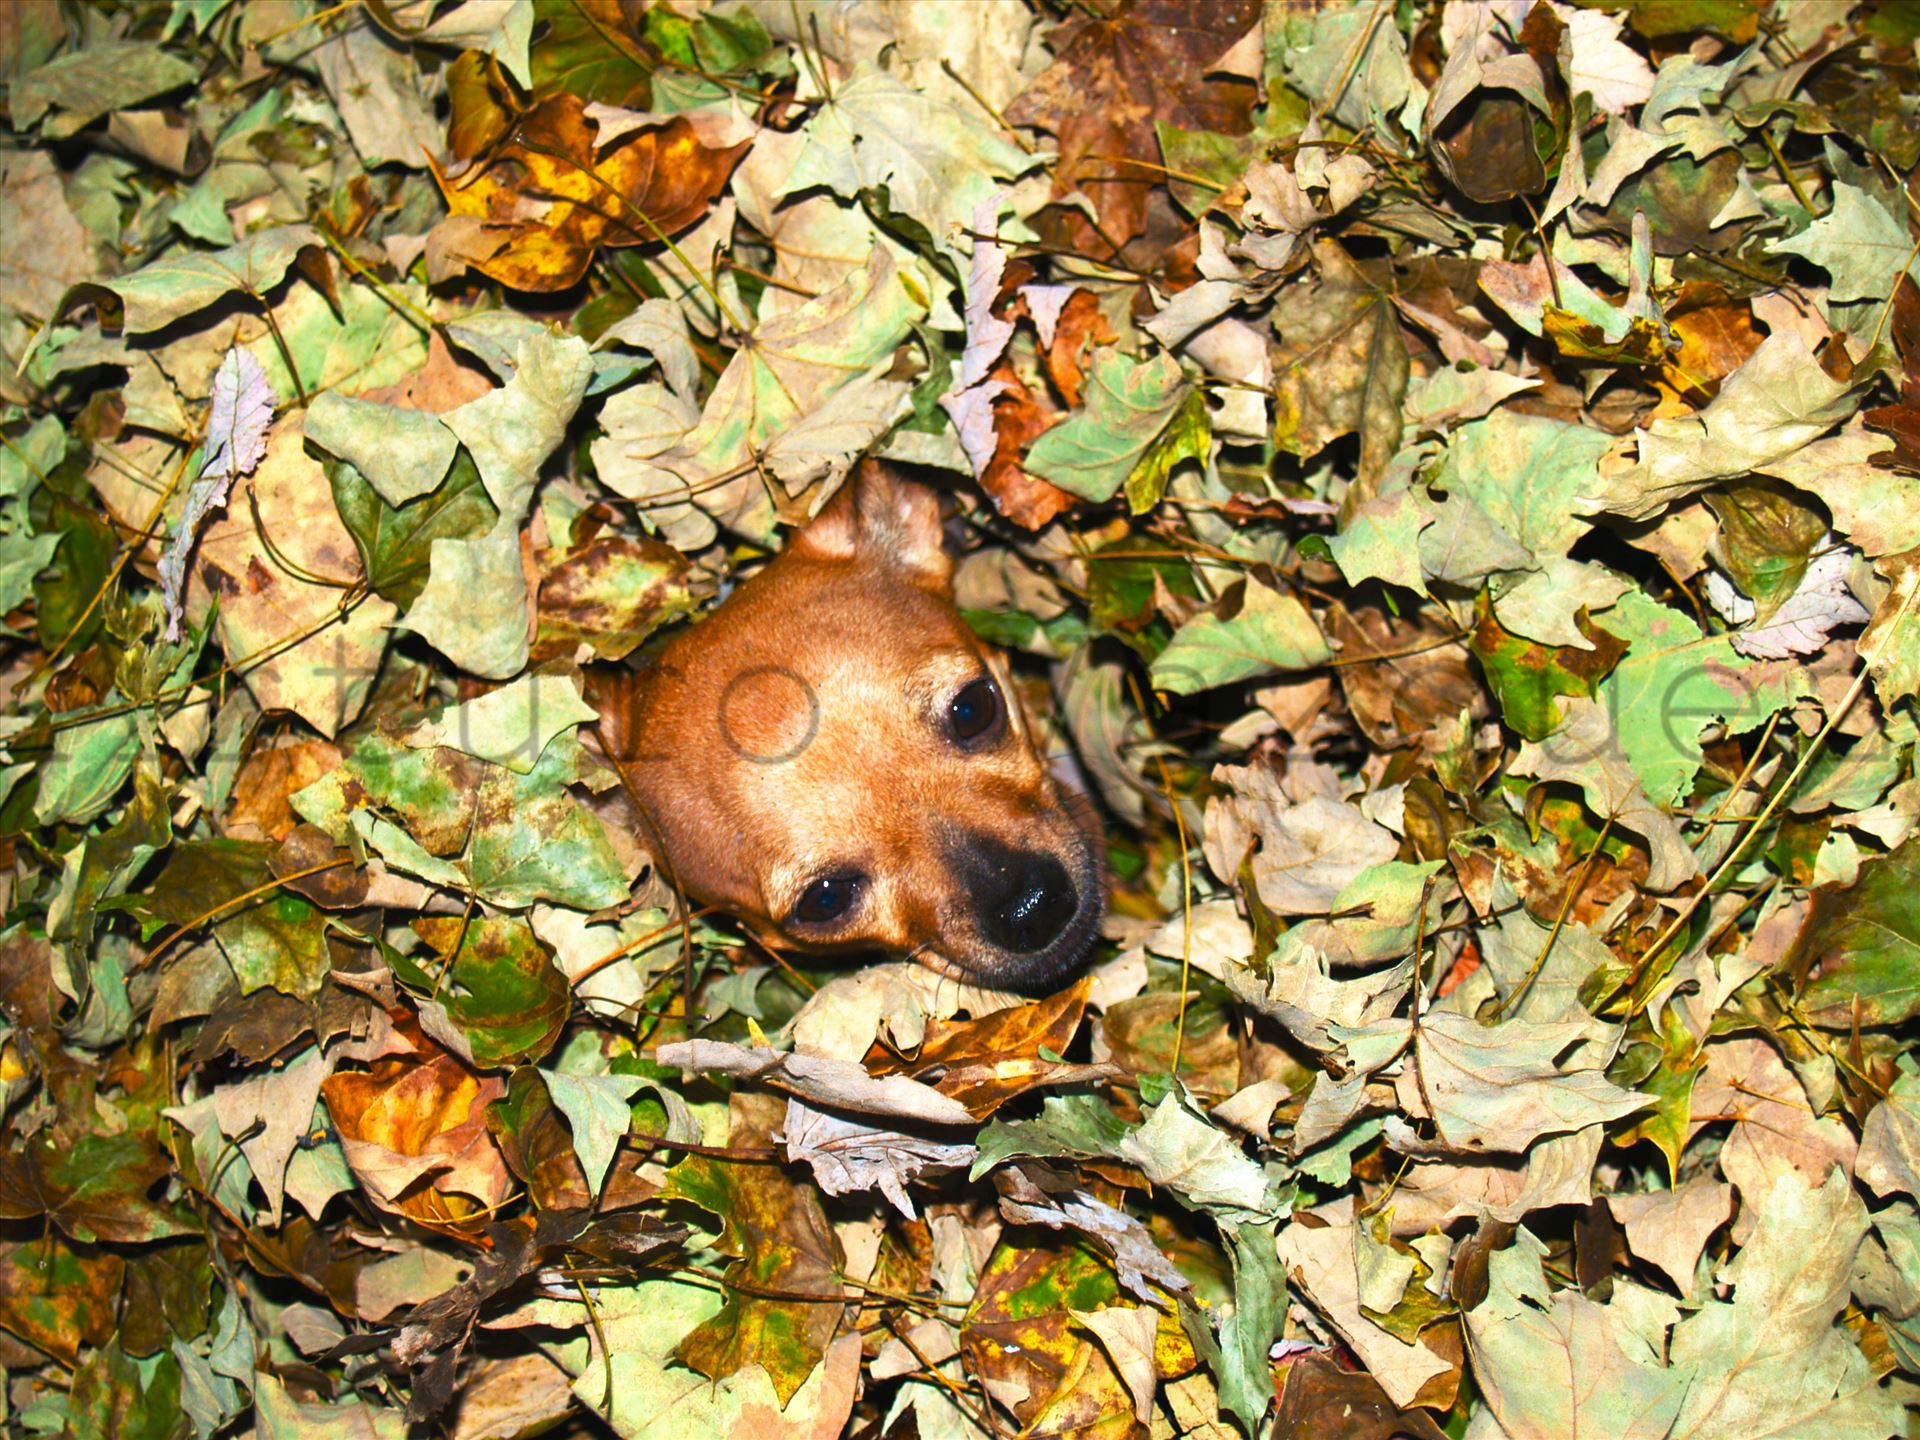 Chihuahua Dog in Autumn Leaves  by ArturoVazquez